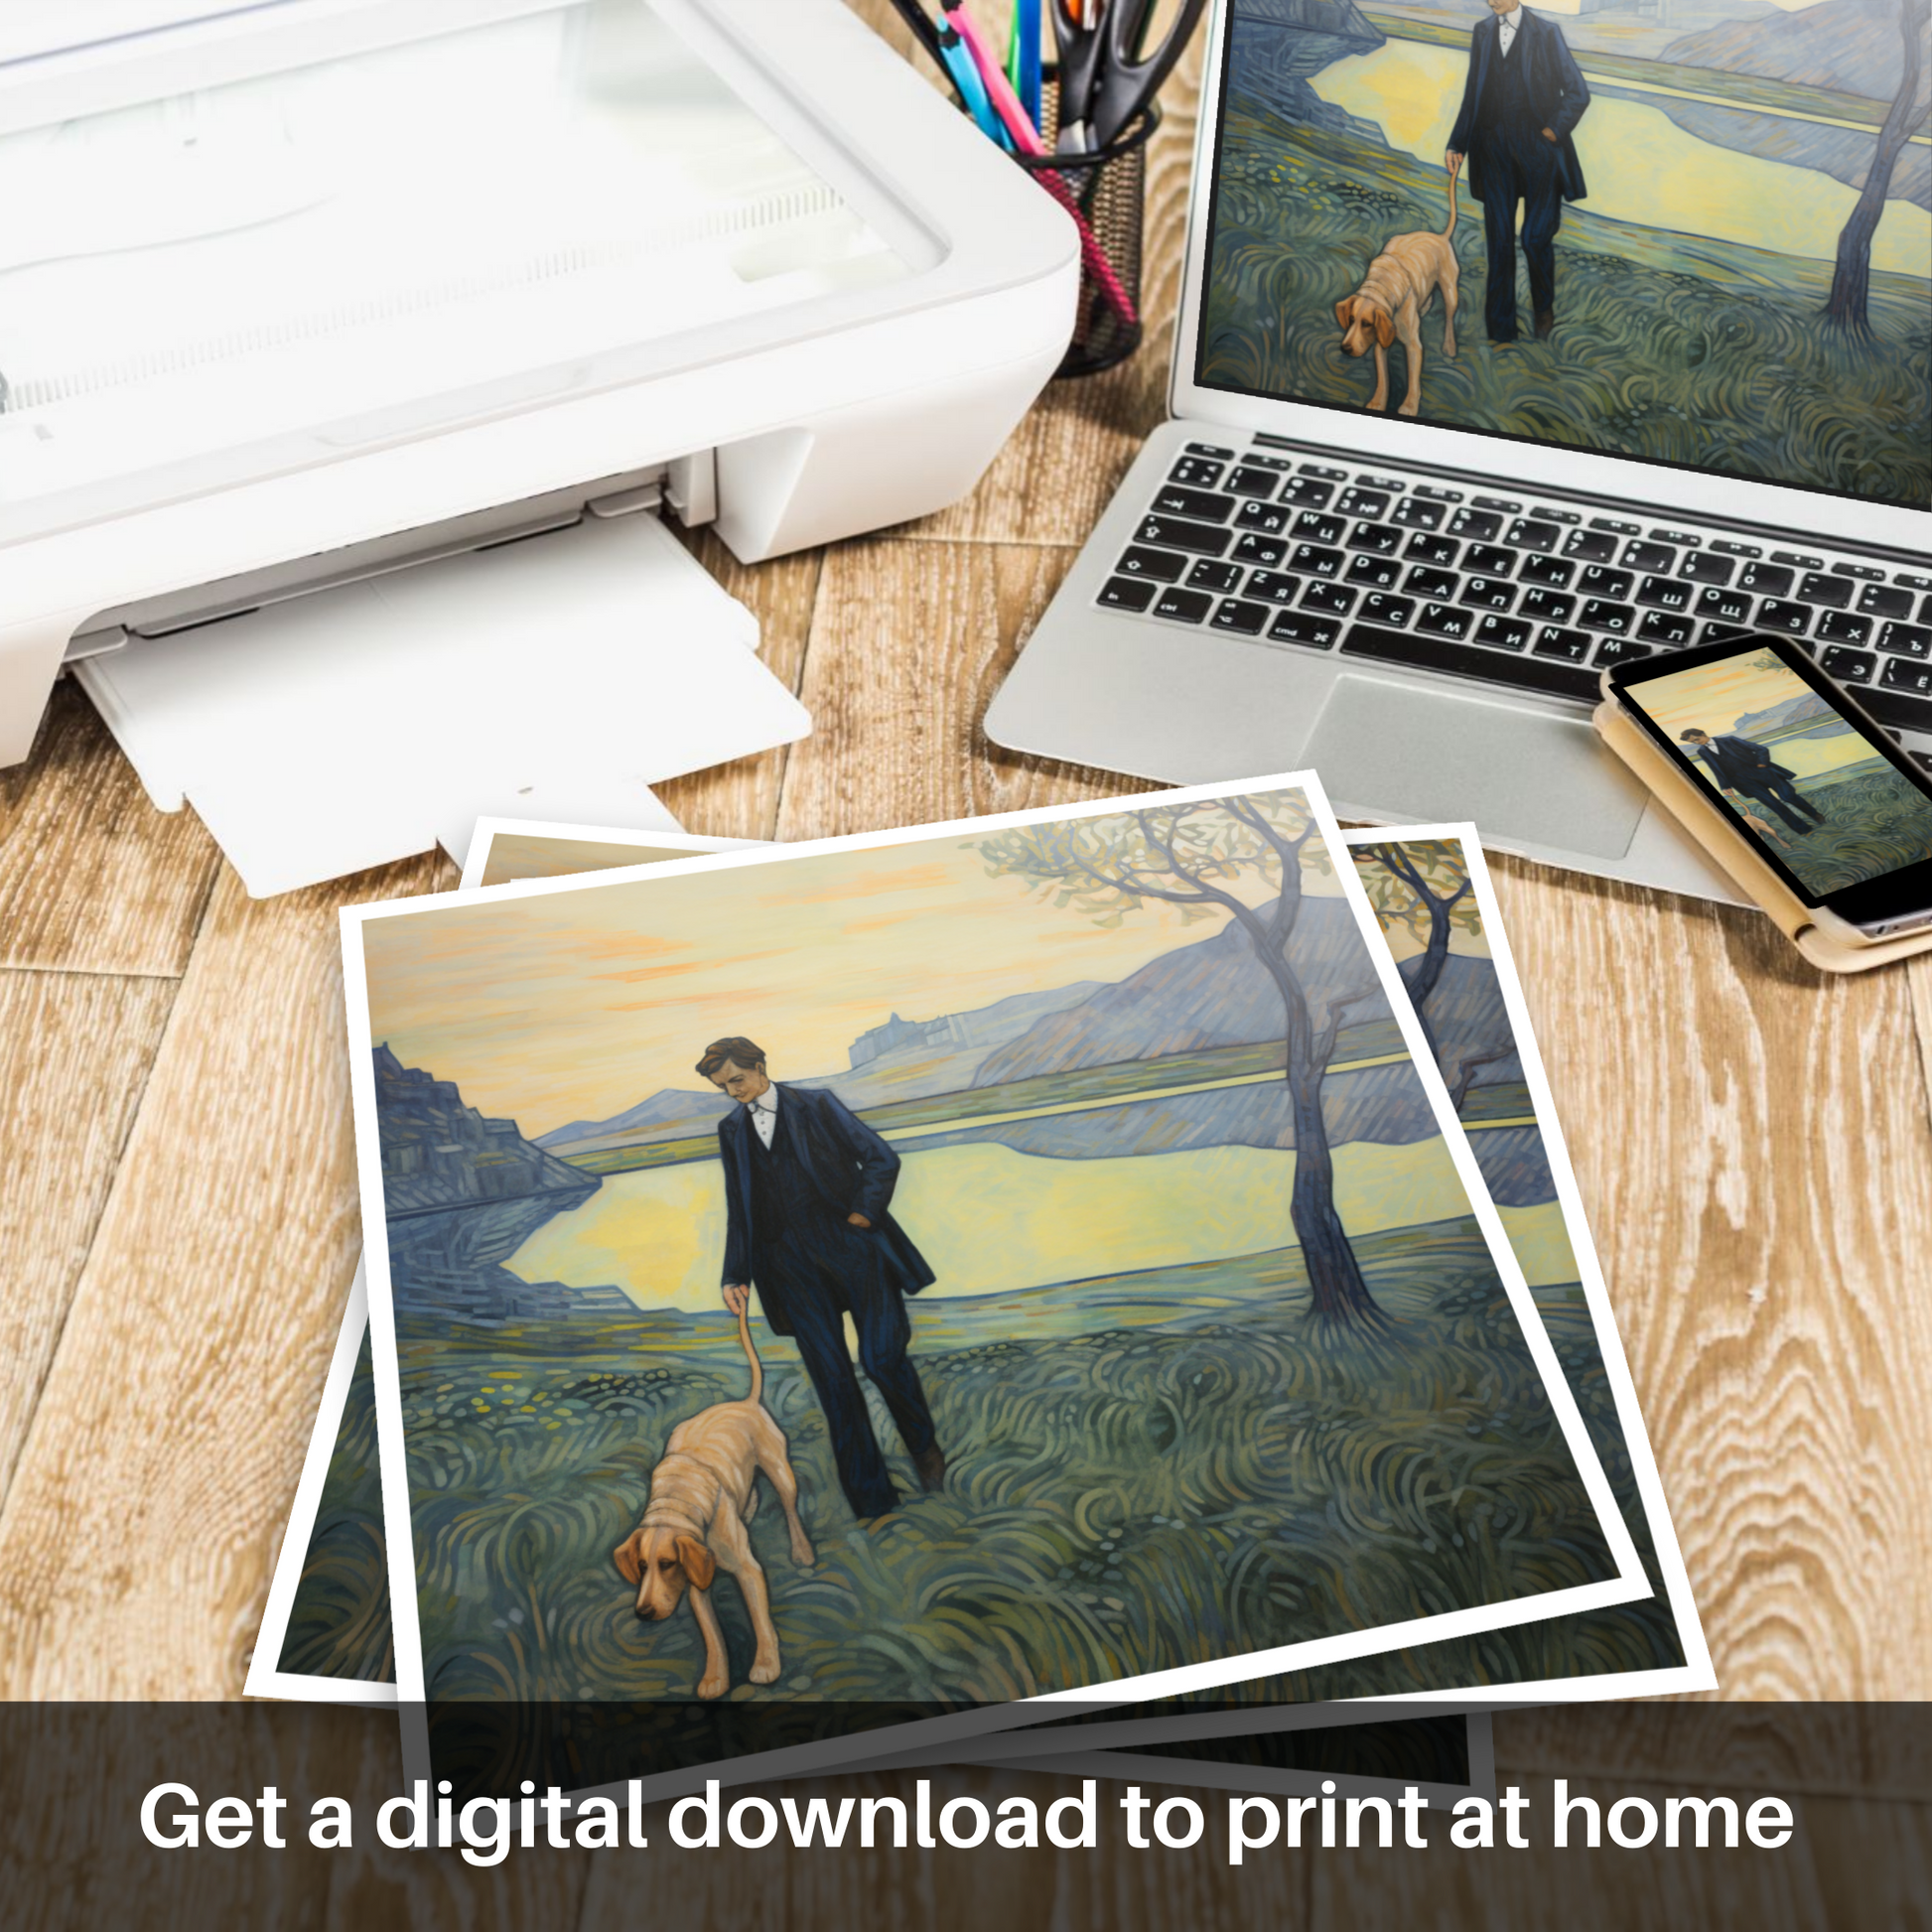 Downloadable and printable picture of A man walking dog at the side of Loch Lomond